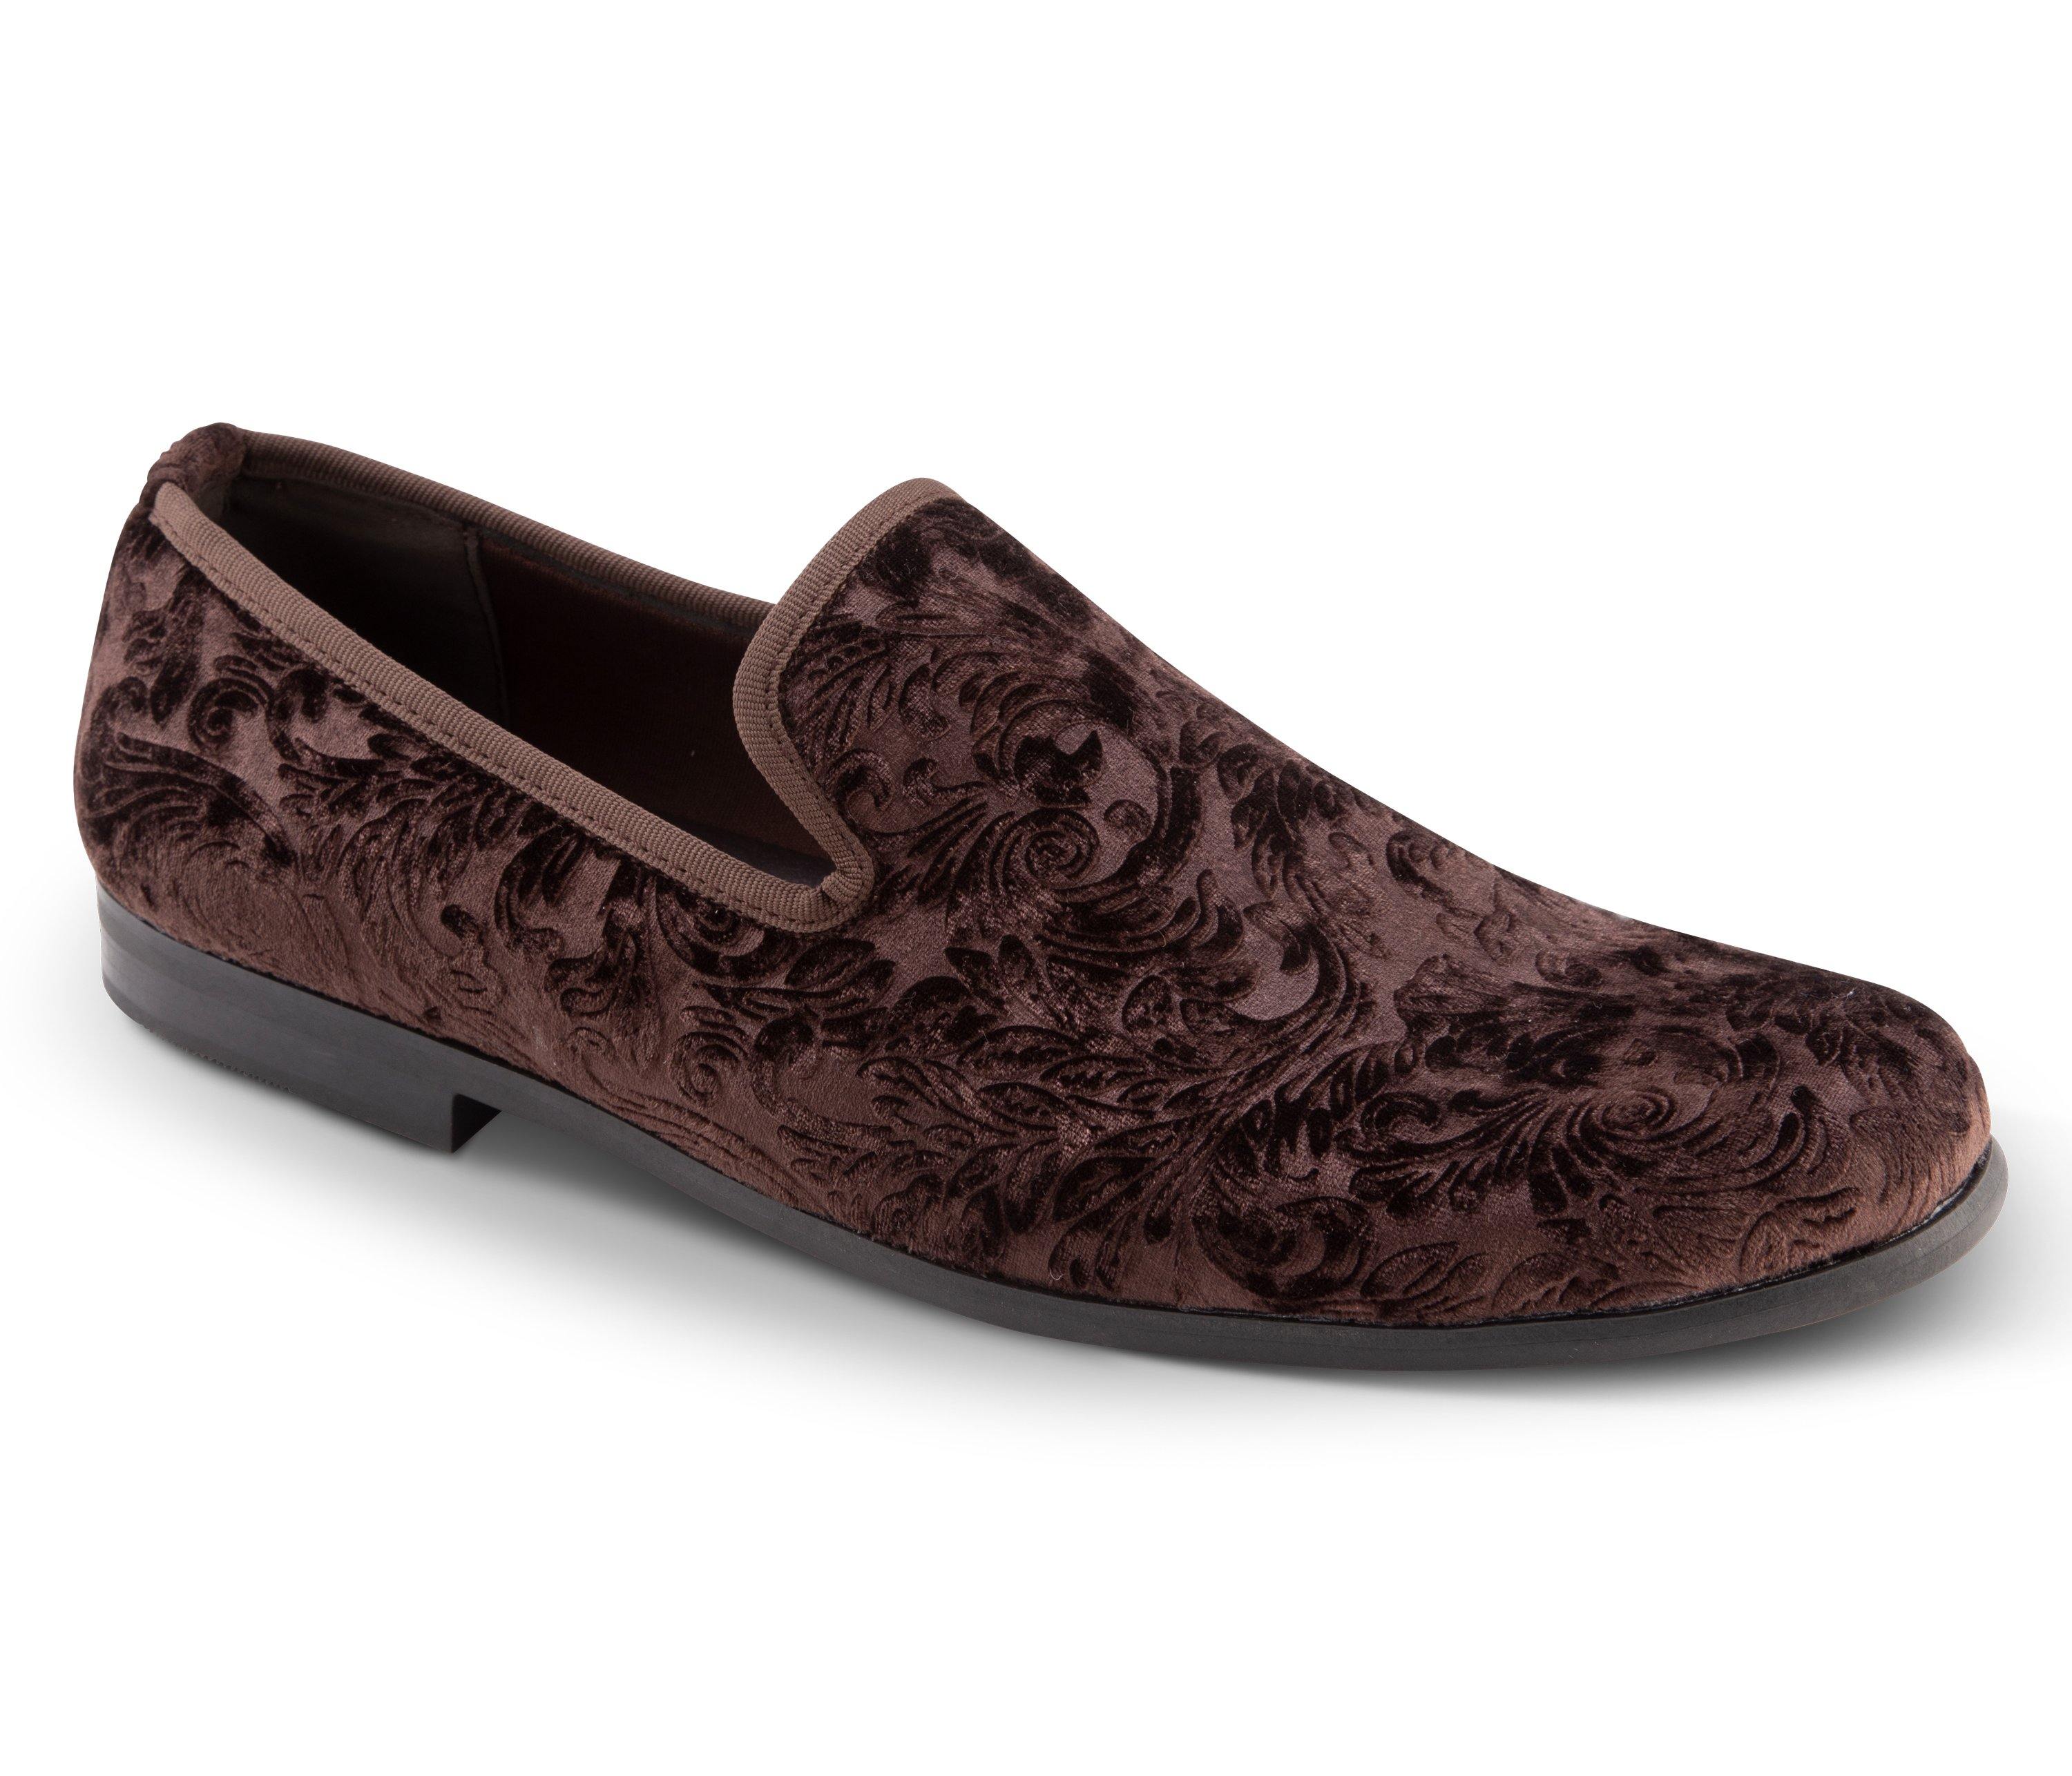 Men's Fashion Loafers Slip-On Shoes Paisley Design in Coffee - S83 - Suits & More